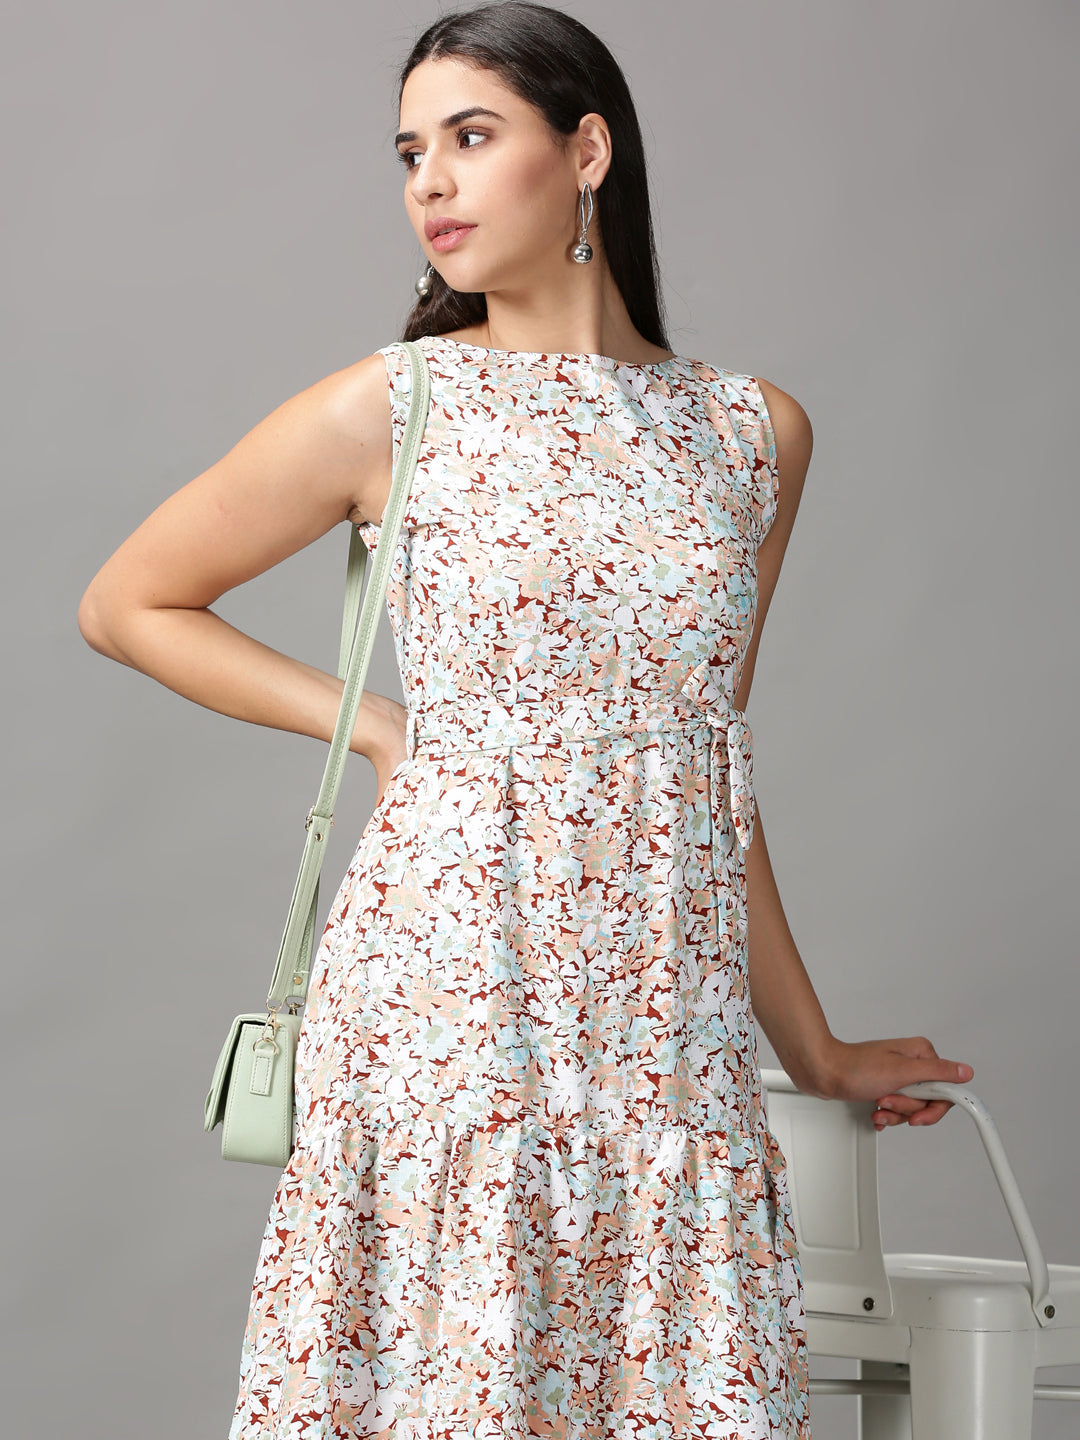 Women's Multi Printed Fit and Flare Dress